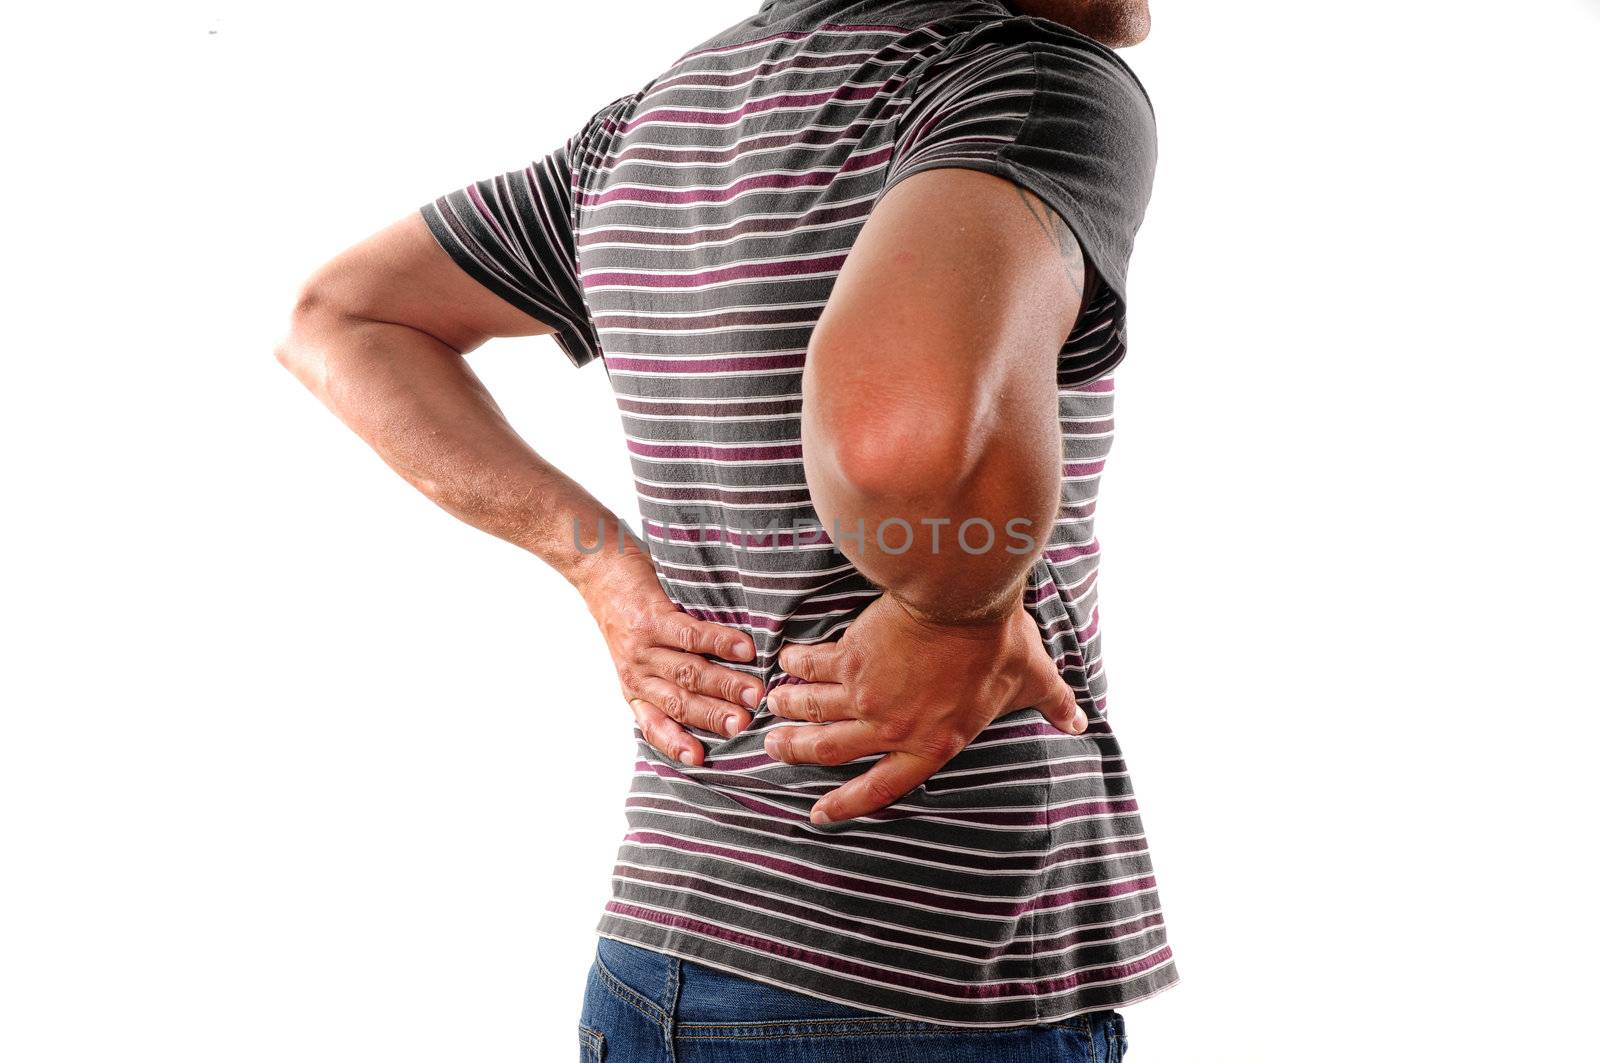 Man holding back who is suffering from lower back pain